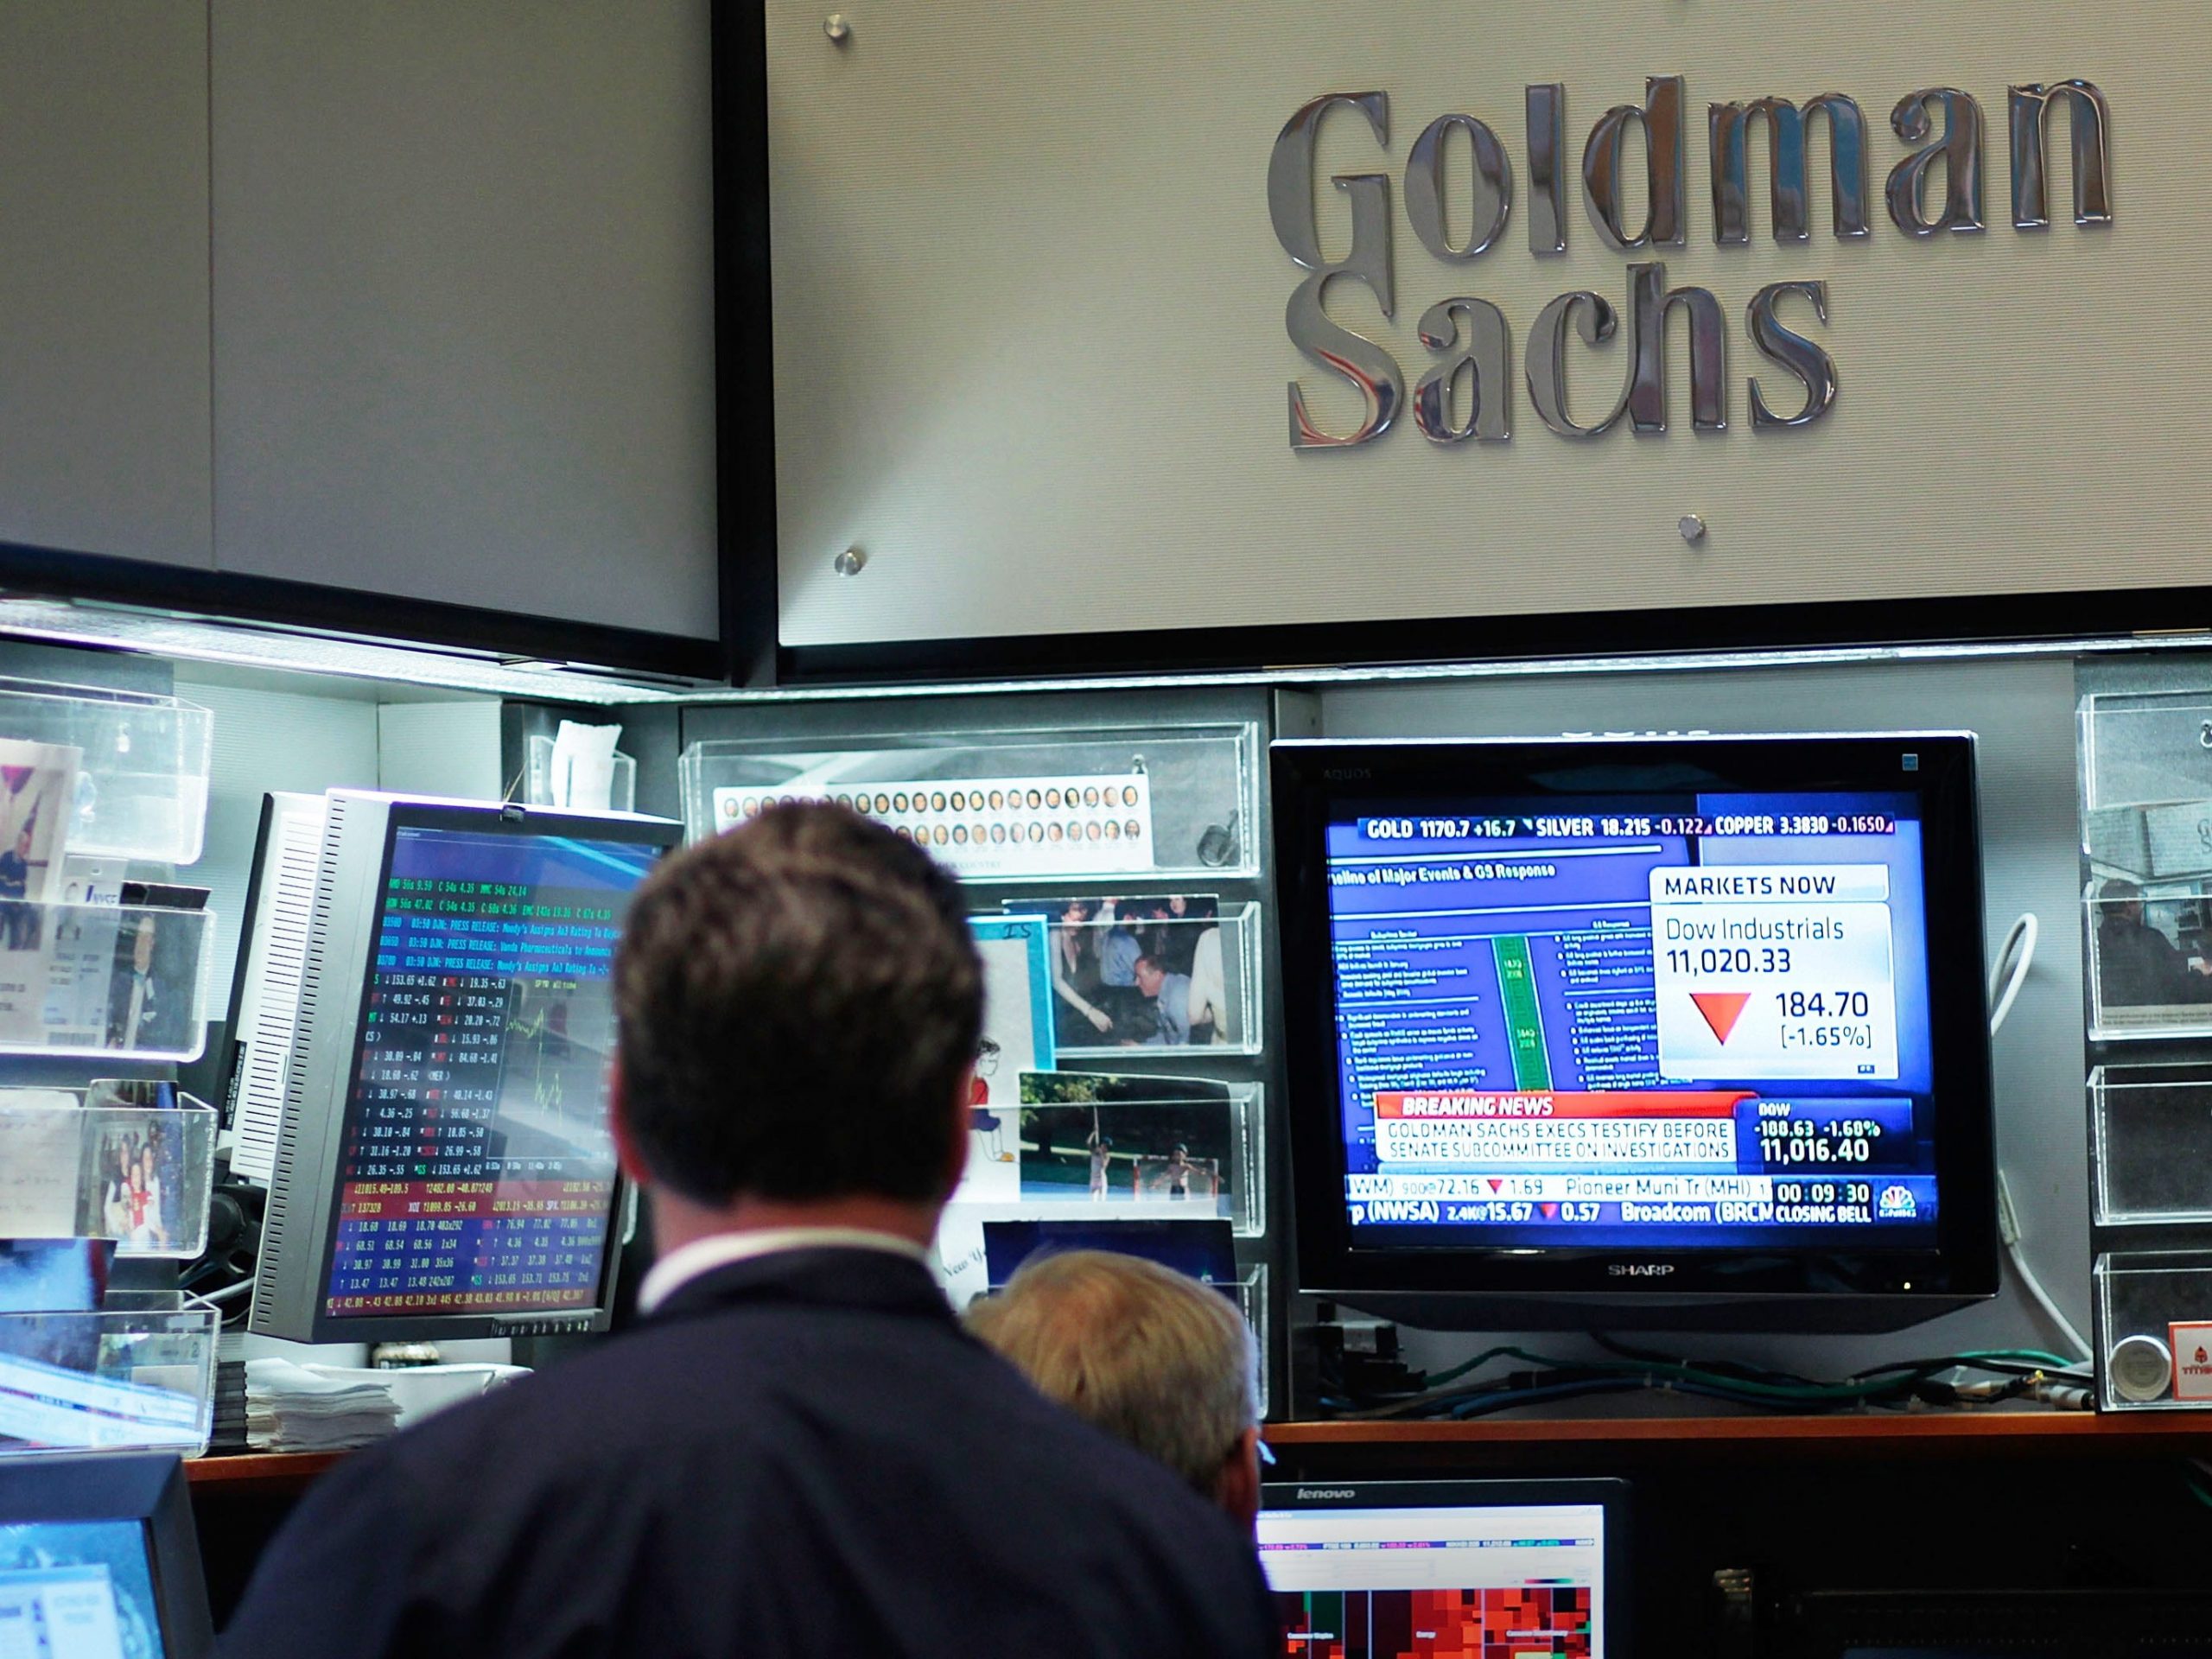 Goldman Sachs highlights 4 key trends from first quarter earnings and